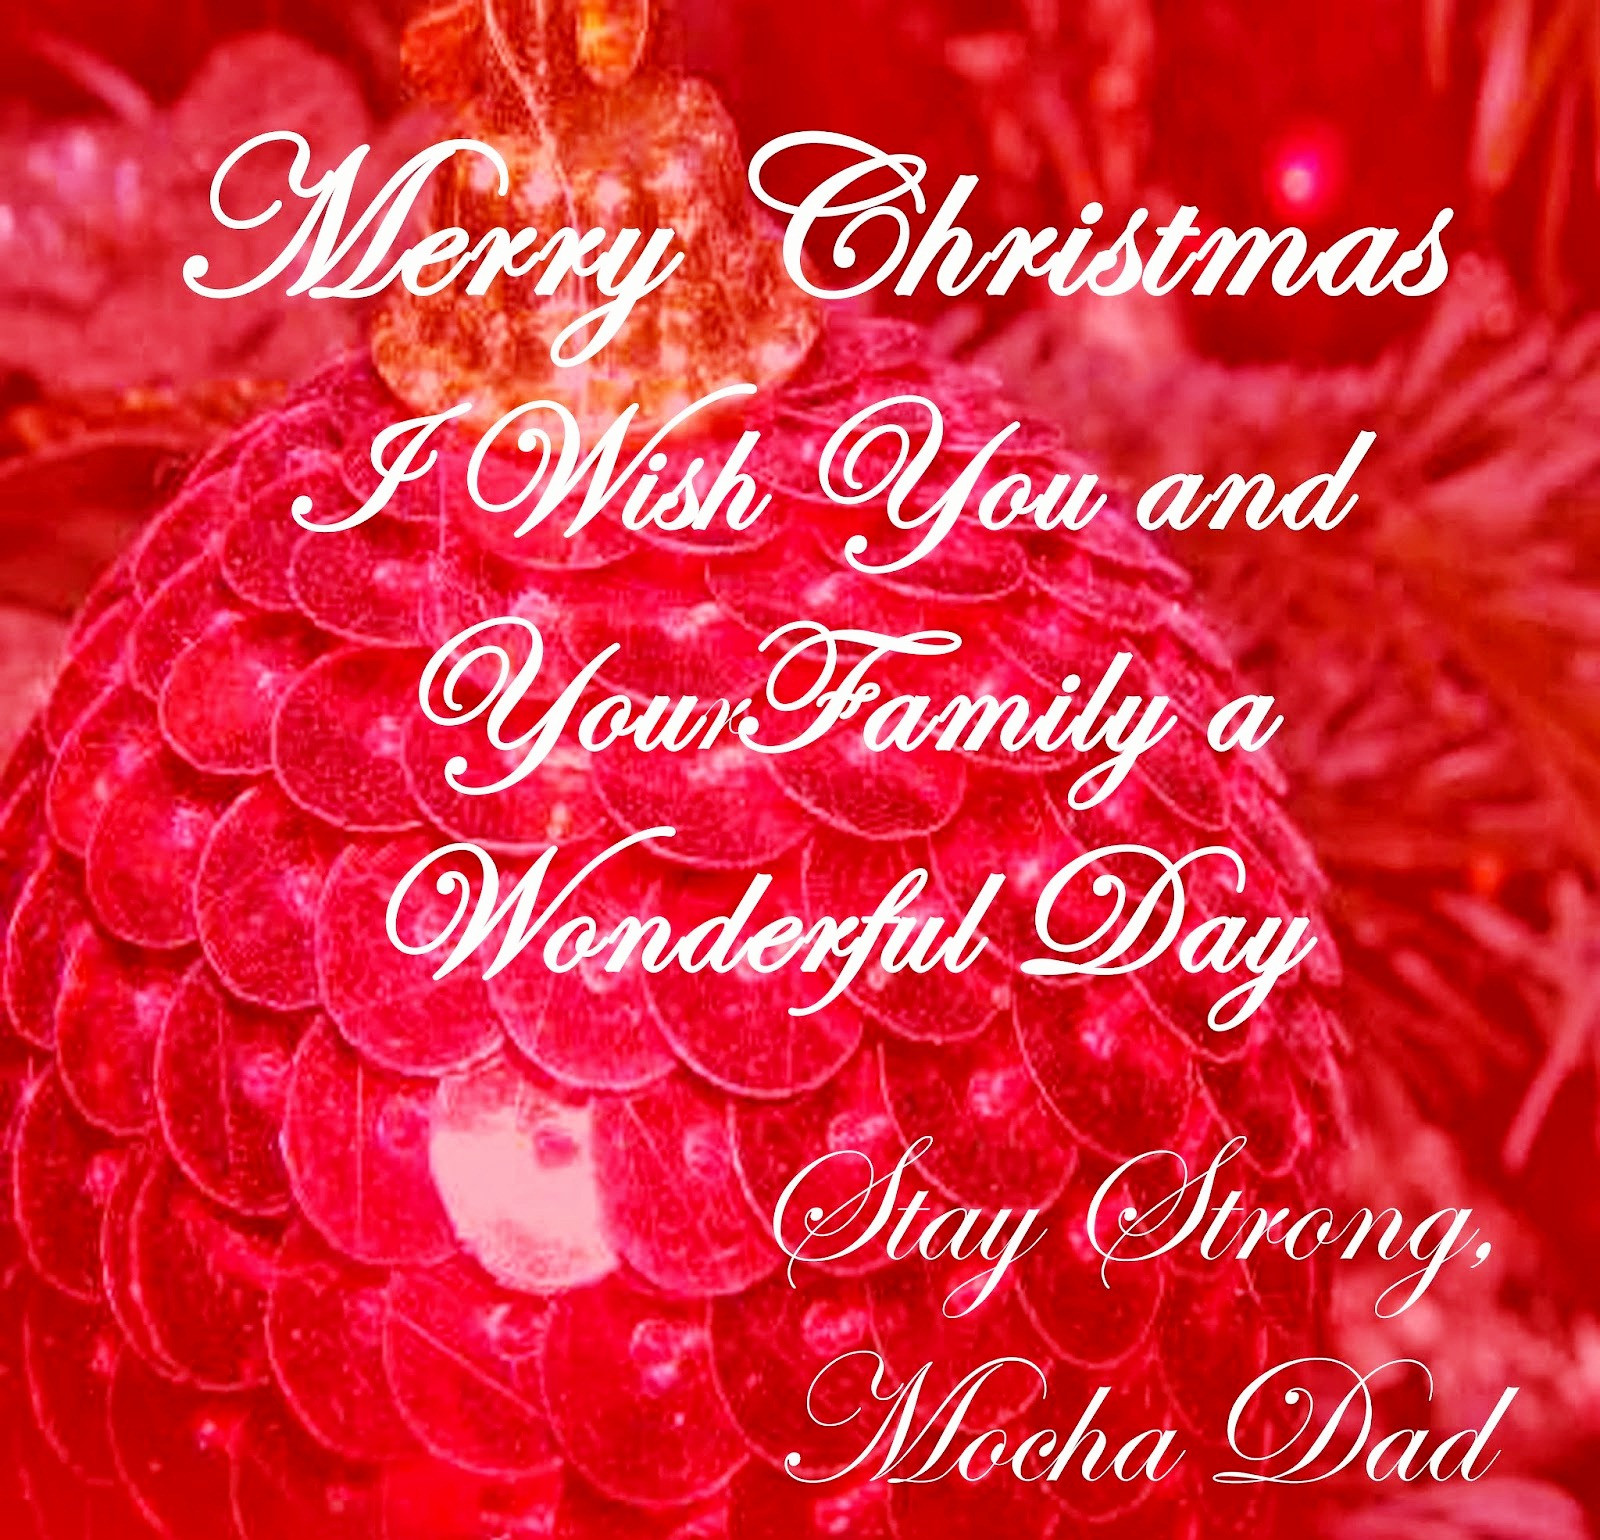 Merry Christmas Images And Quotes
 20 Merry Christmas Quotes 2014